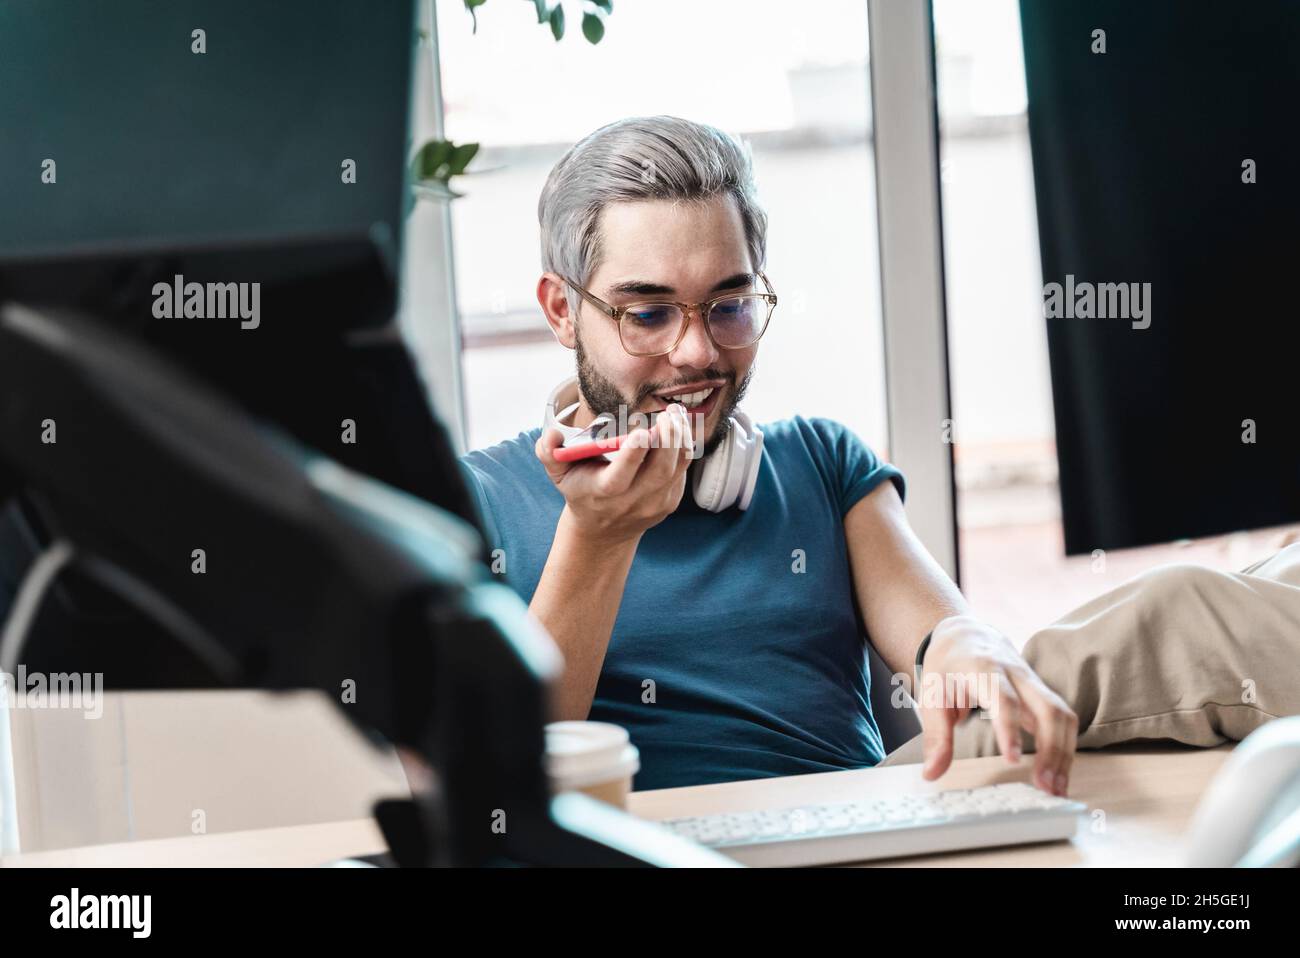 Happy millenial business man using mobile phone while working inside coworking office - Focus on face Stock Photo